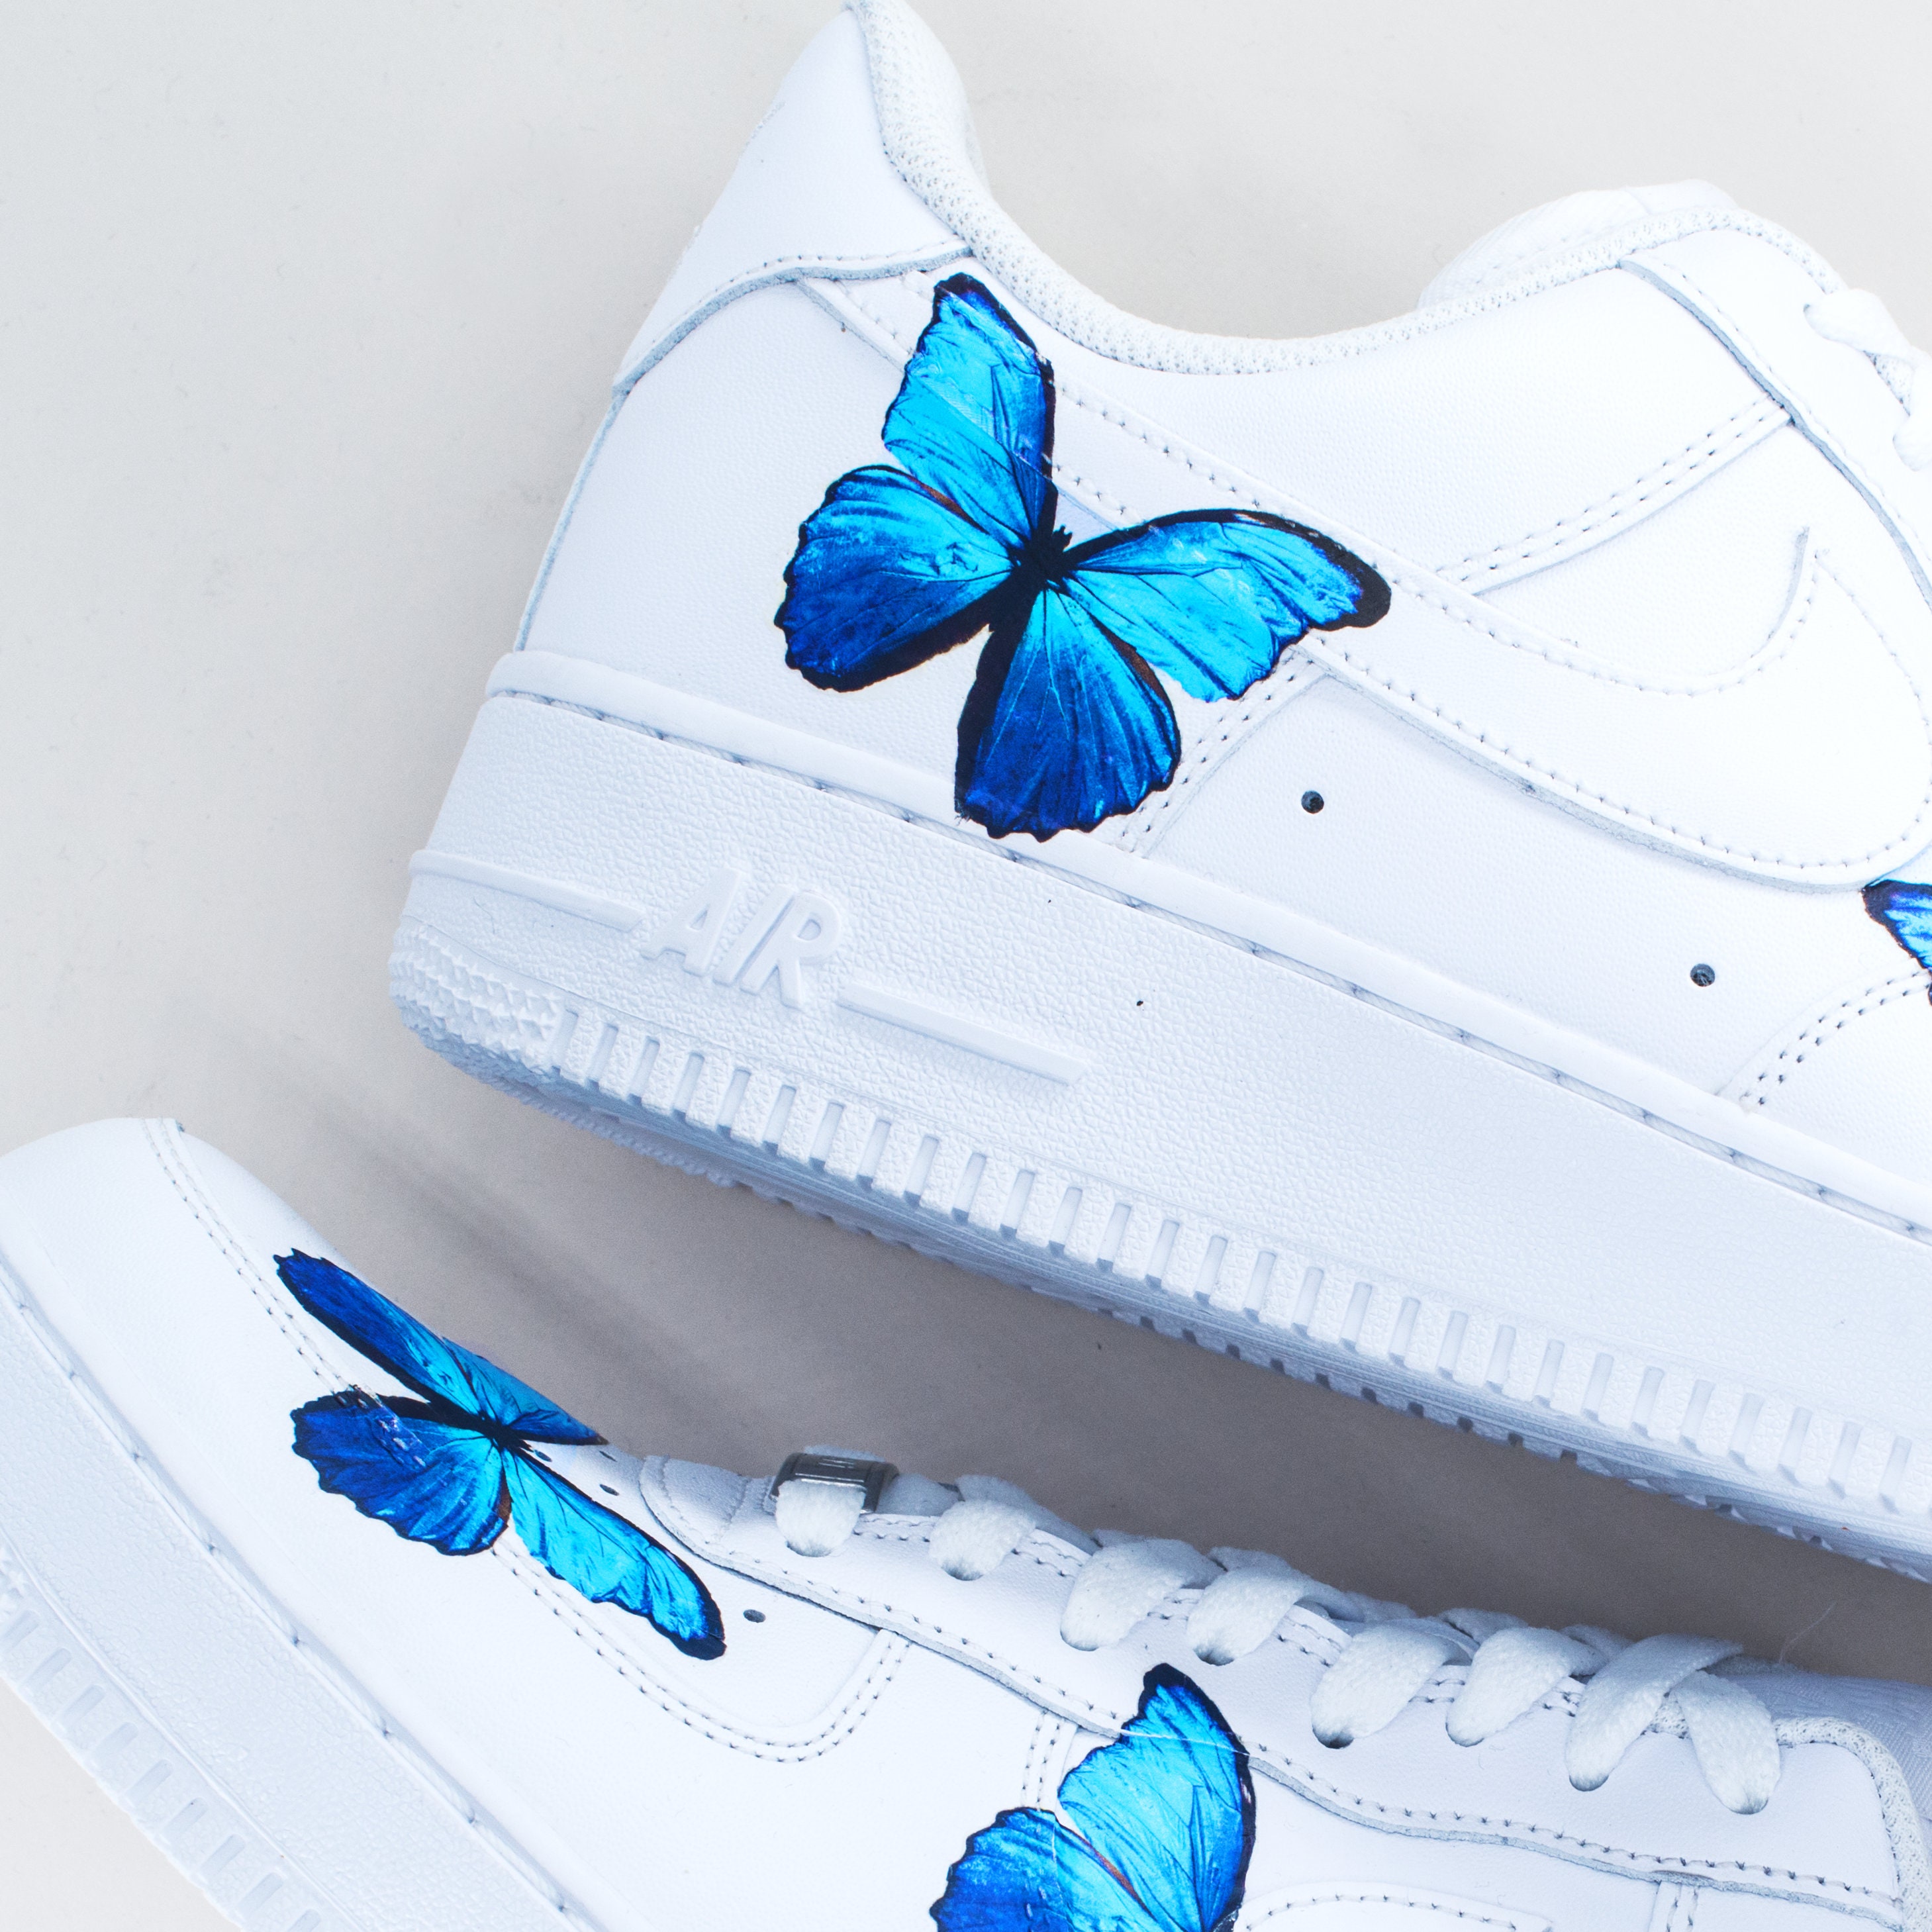 Custom Air Force 1 Butterfly Blue Black Drip Butterfly Af1 -  Norway